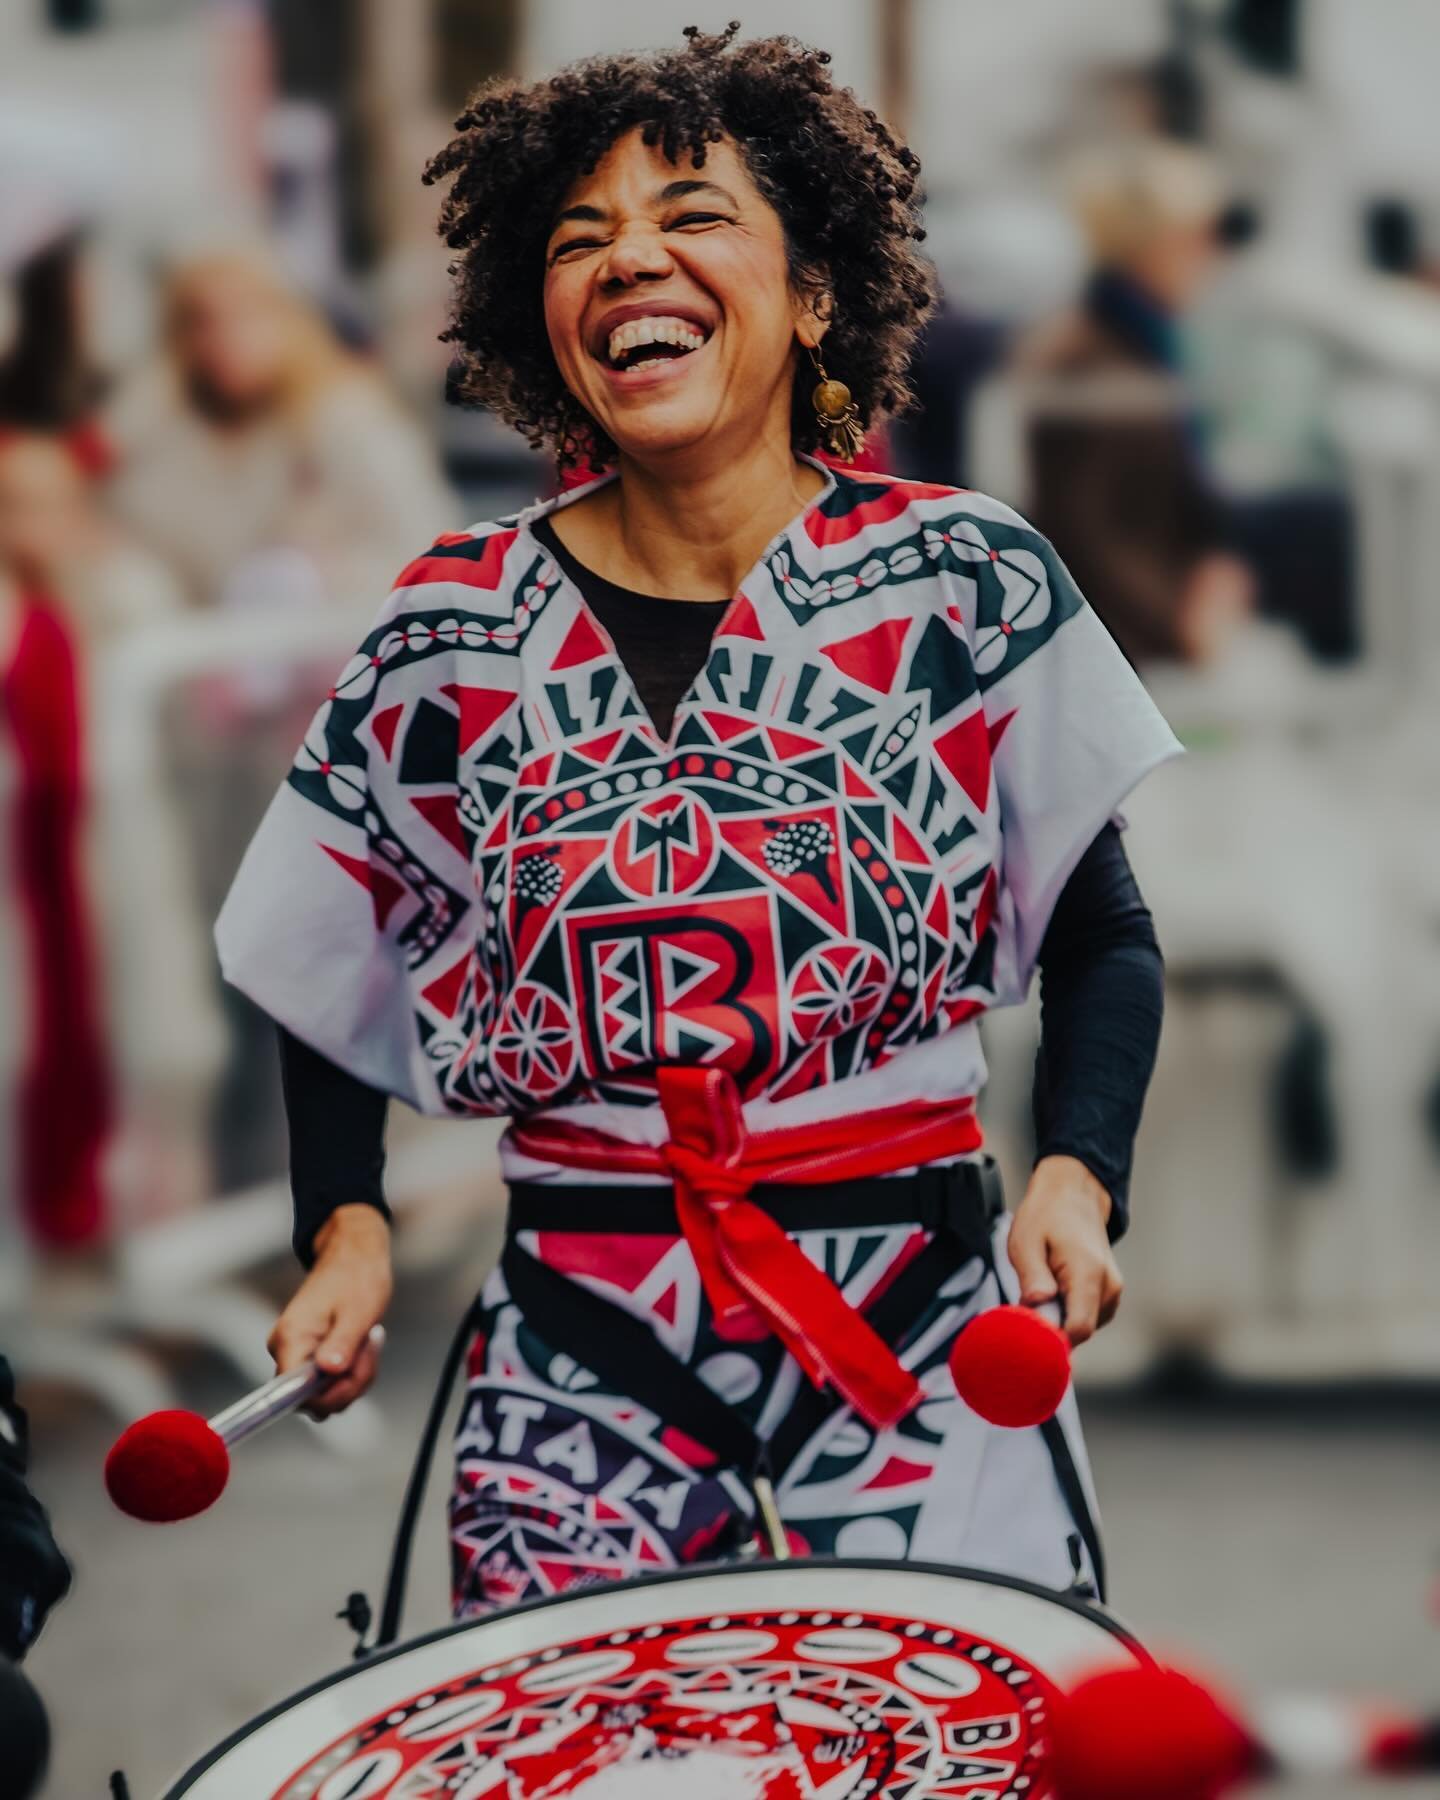 Every year on April 23rd, National Take a Chance Day encourages us to break out of our comfort zone.

Take that opportunity to do that this weekend Sunday 2pm-3:30pm with @batalanewyork at @cumbedance for Afro Brazilian drumming class. 

🥁 #National